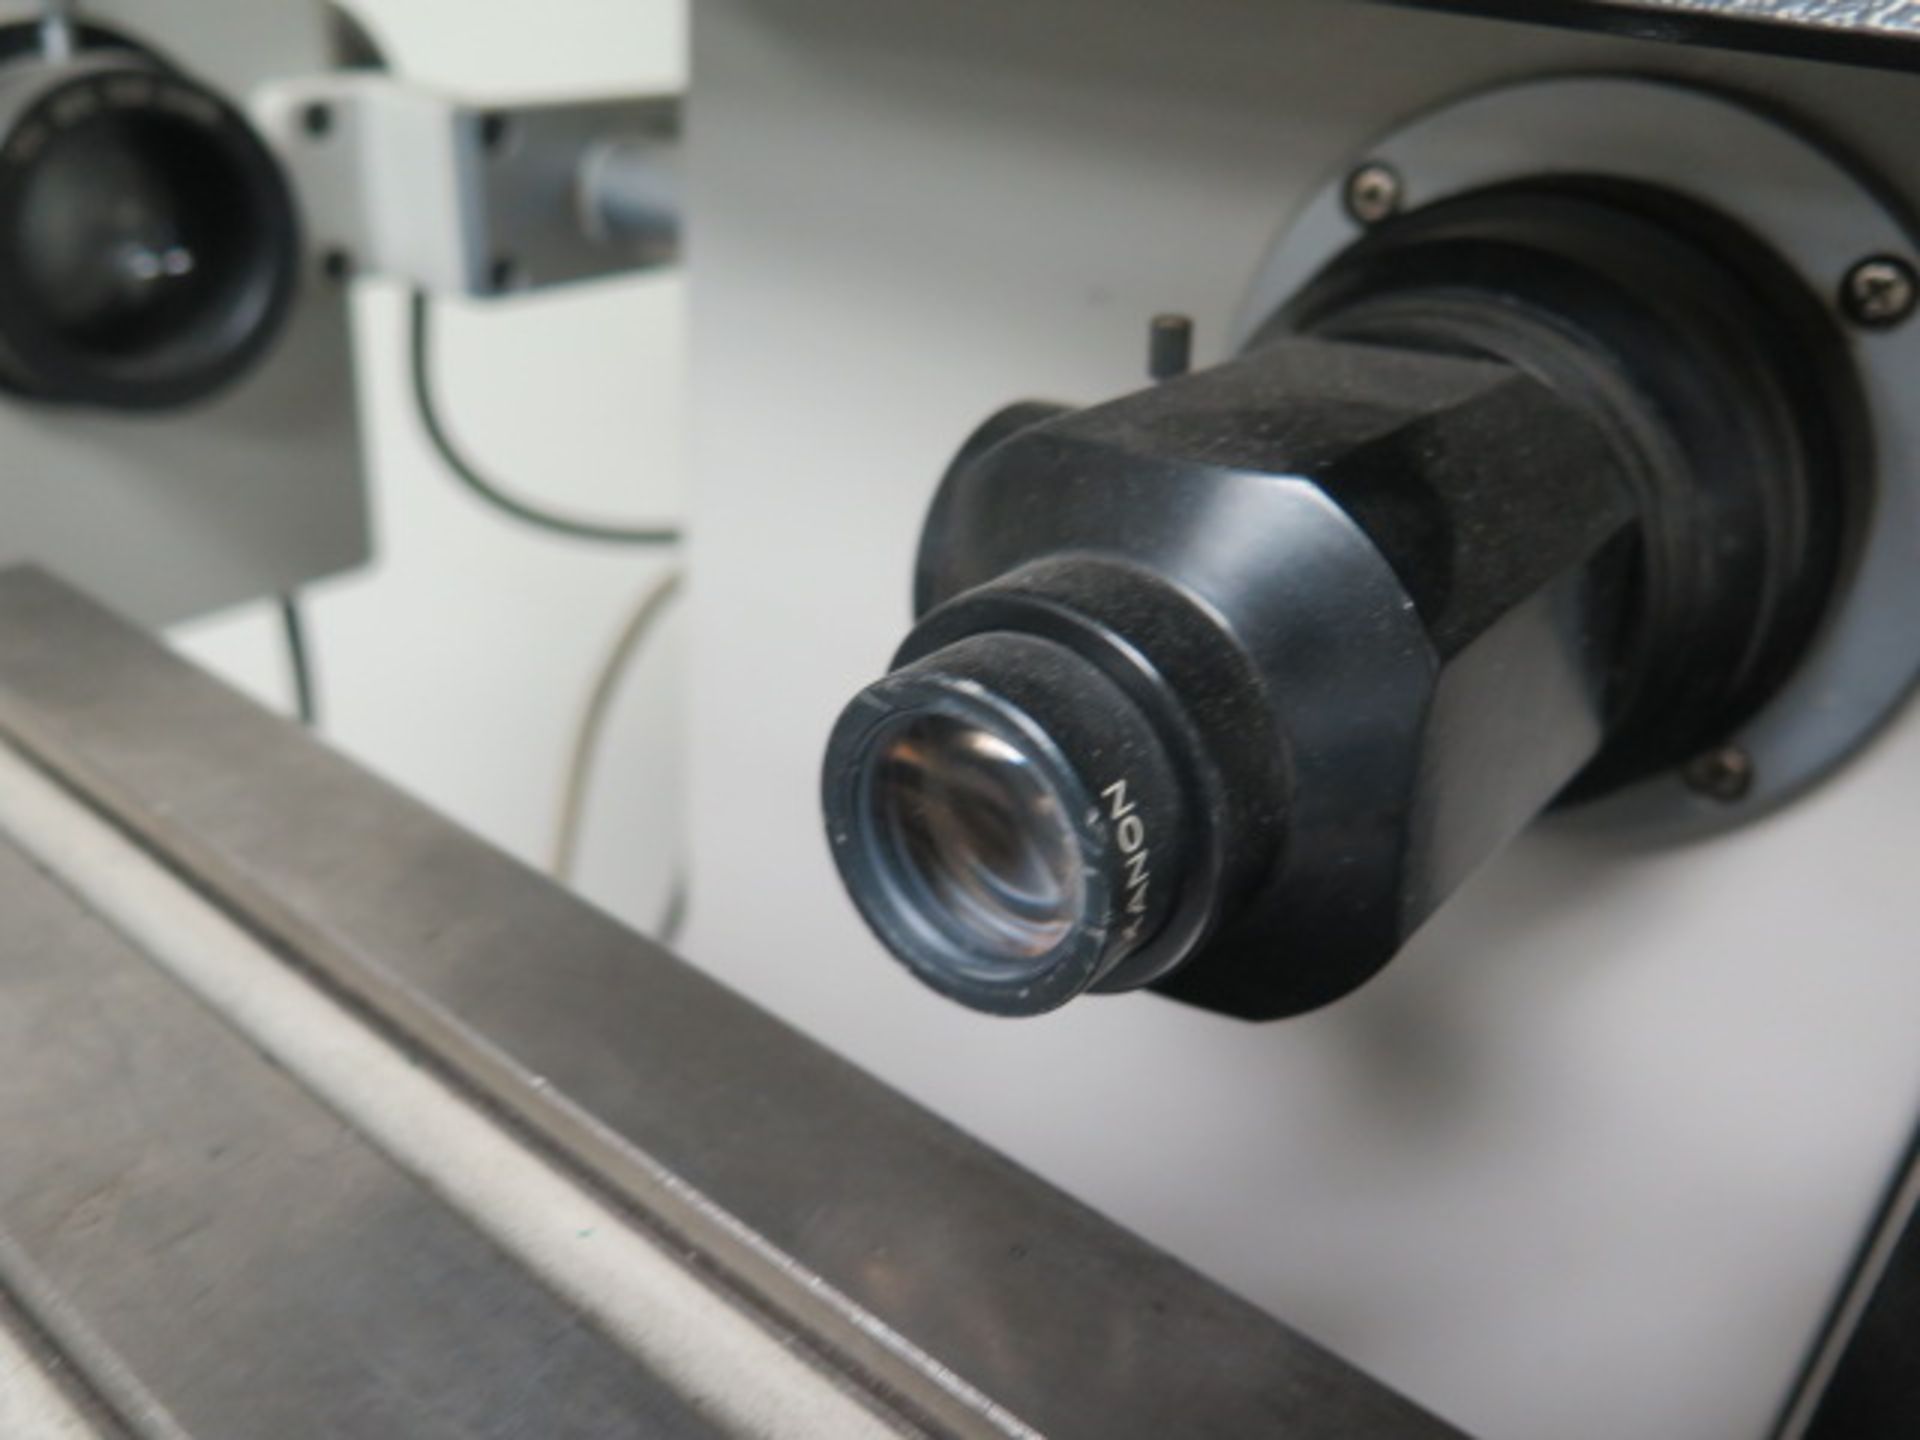 Mitutoyo PH-350 13" Optical Comparator s/n 362 w/ Mitutoyo DRO's, 20X and 50X Lenses, SOLD AS IS - Image 7 of 12